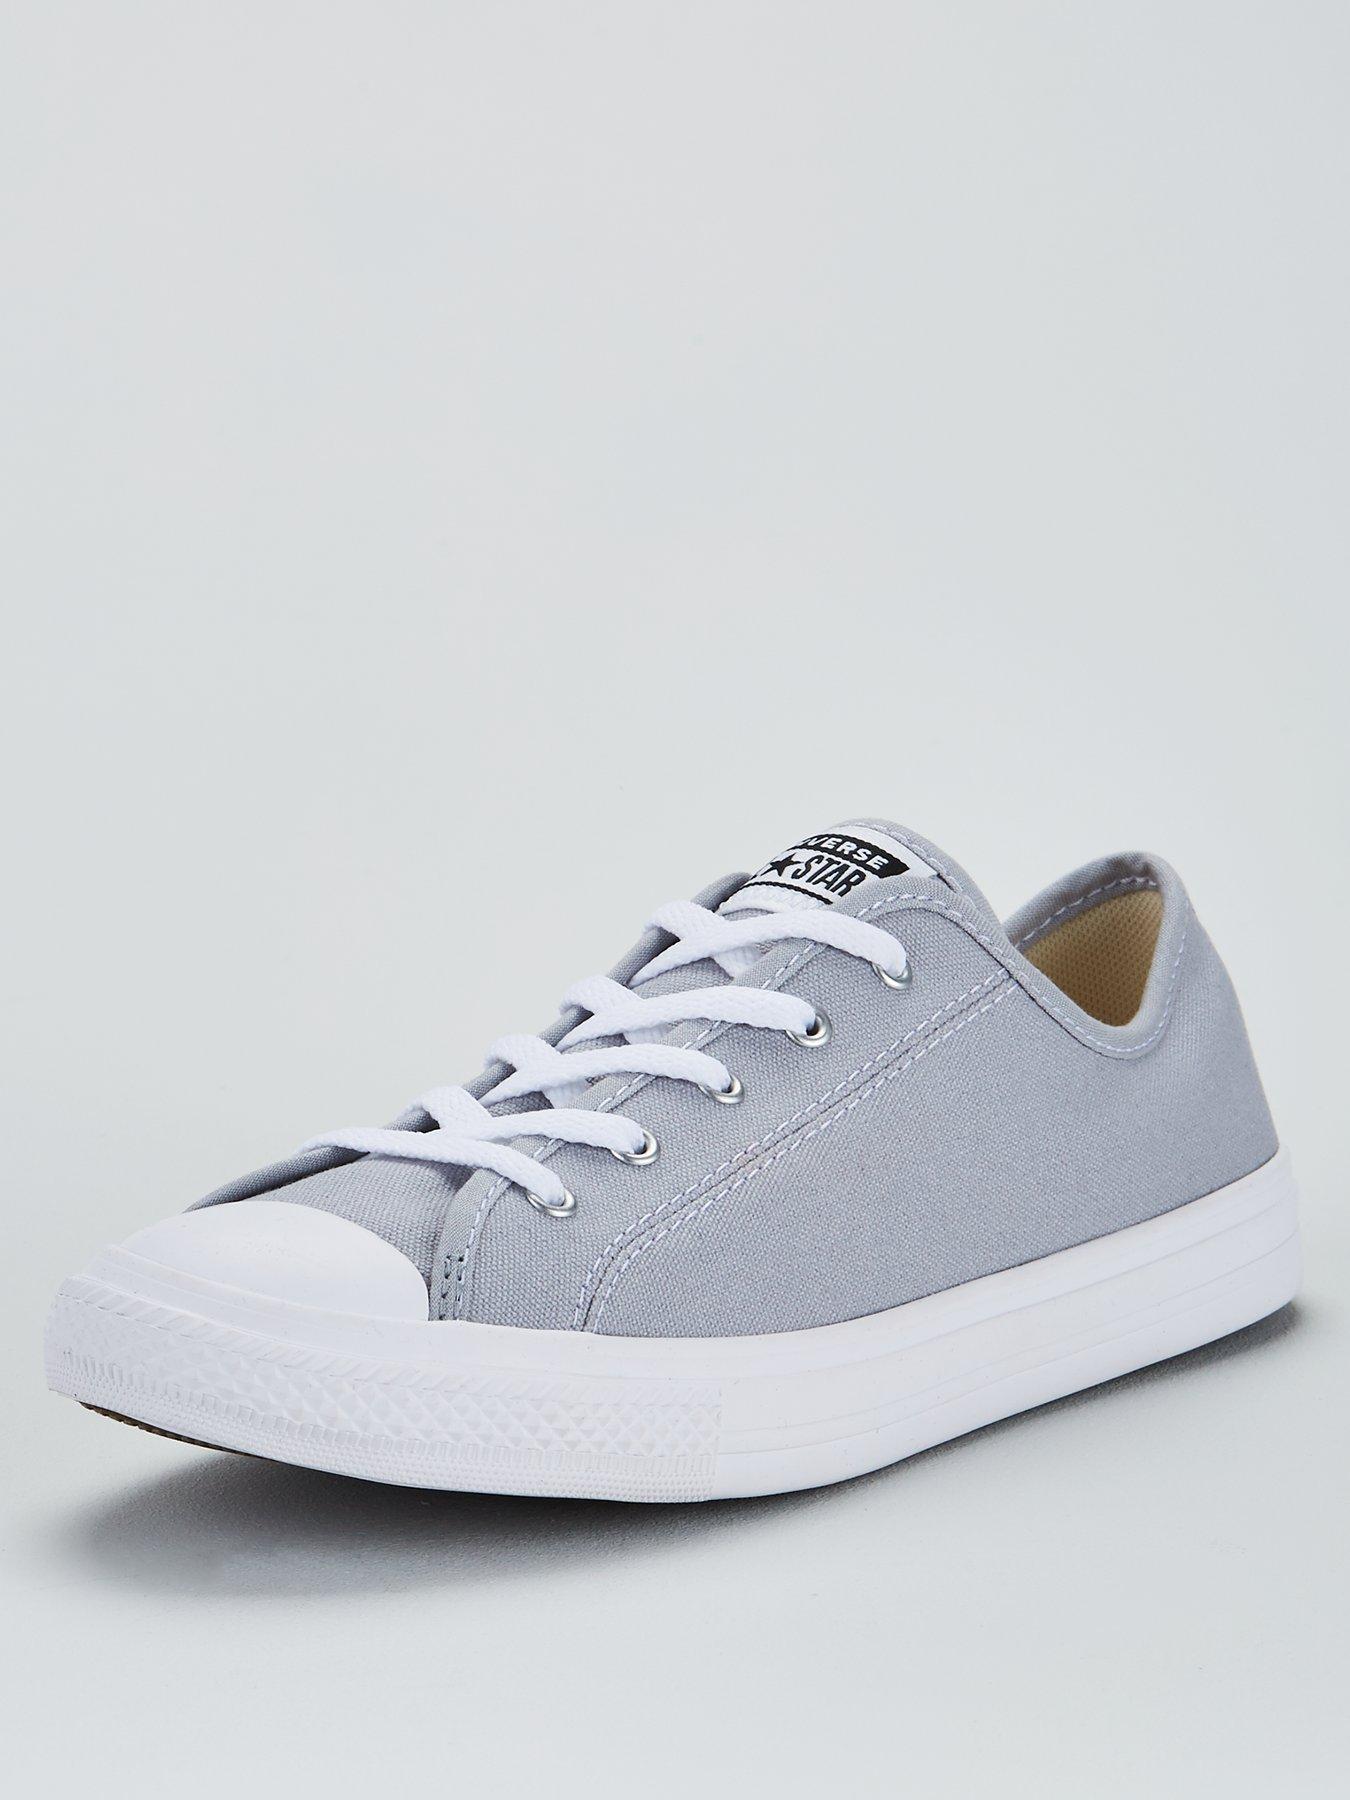 boys converse trainers uk